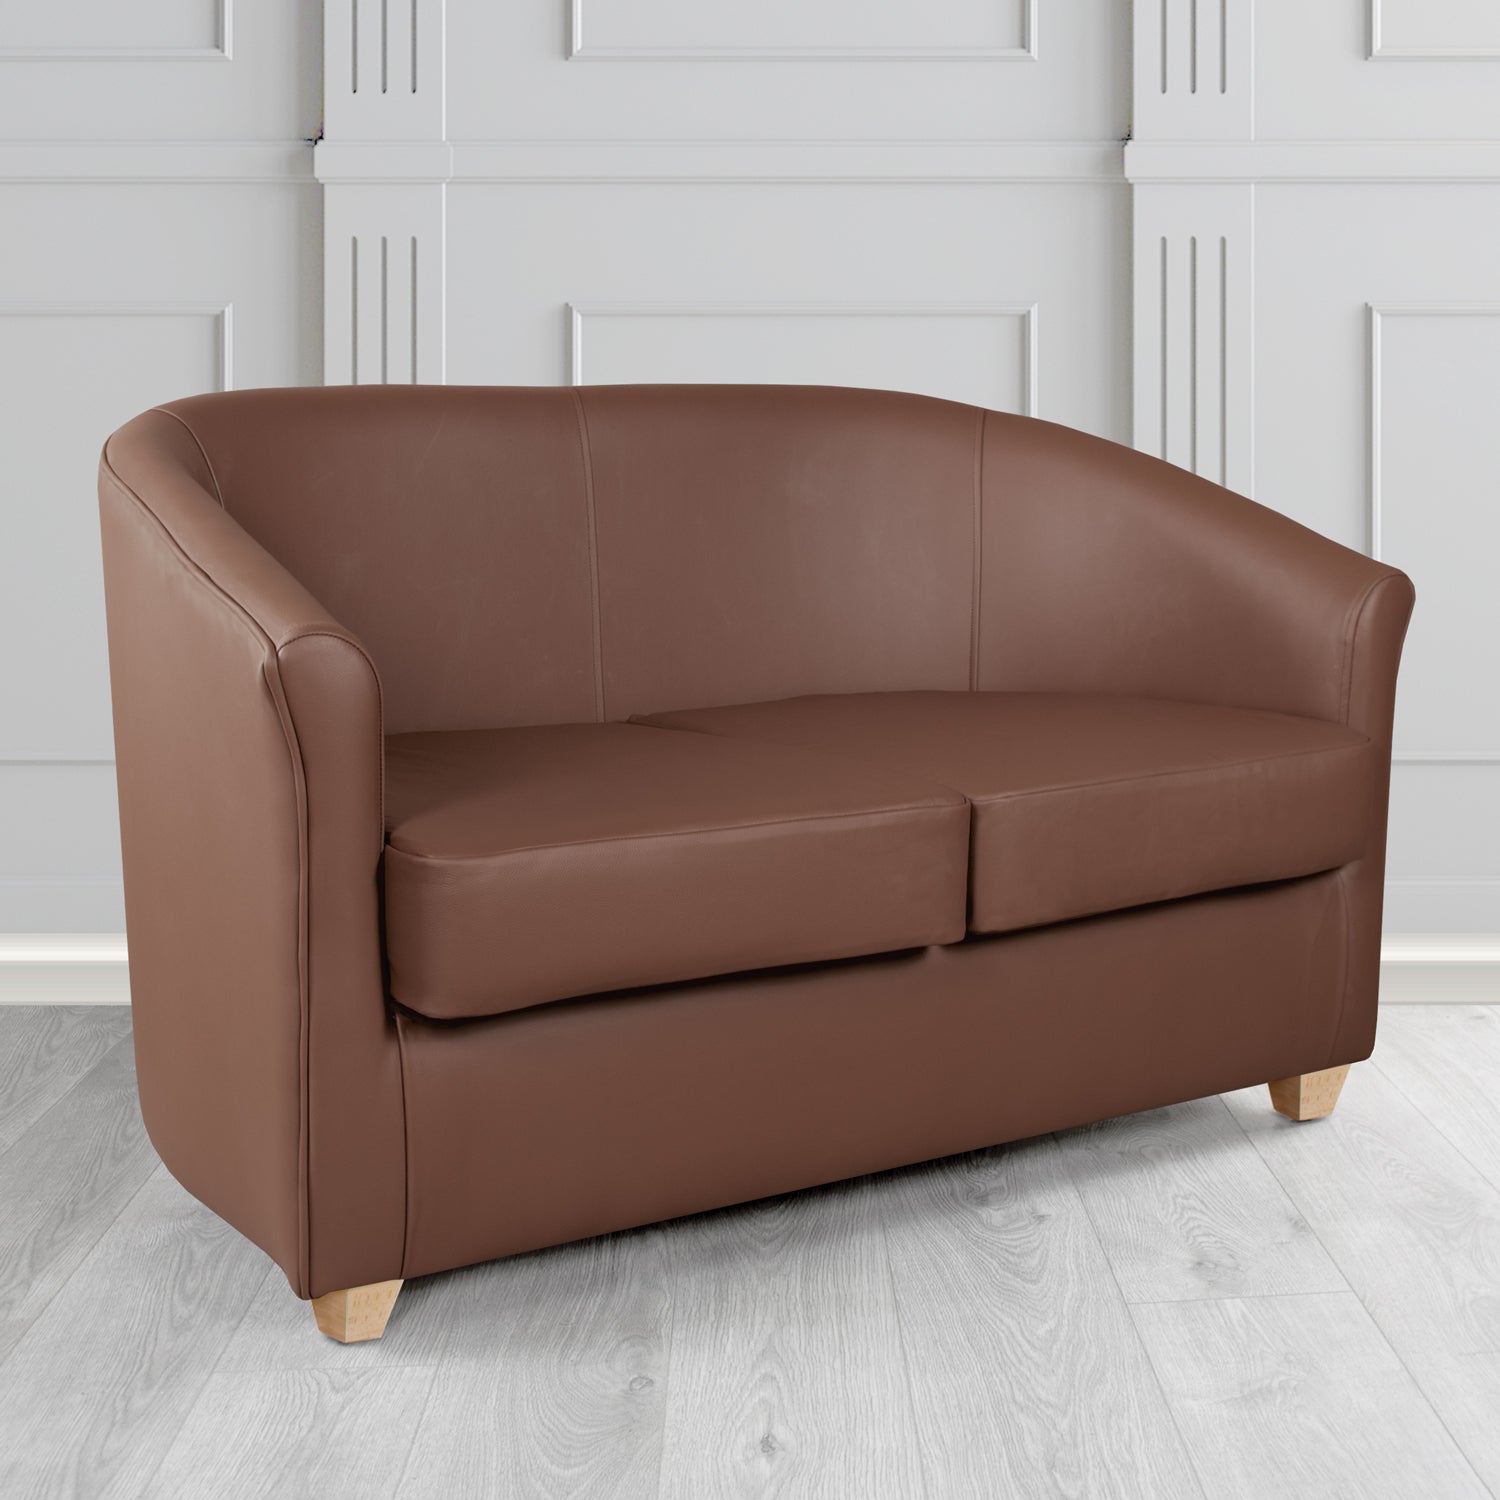 Cannes 2 Seater Tub Sofa in Chestnut Brown DCB Faux Leather